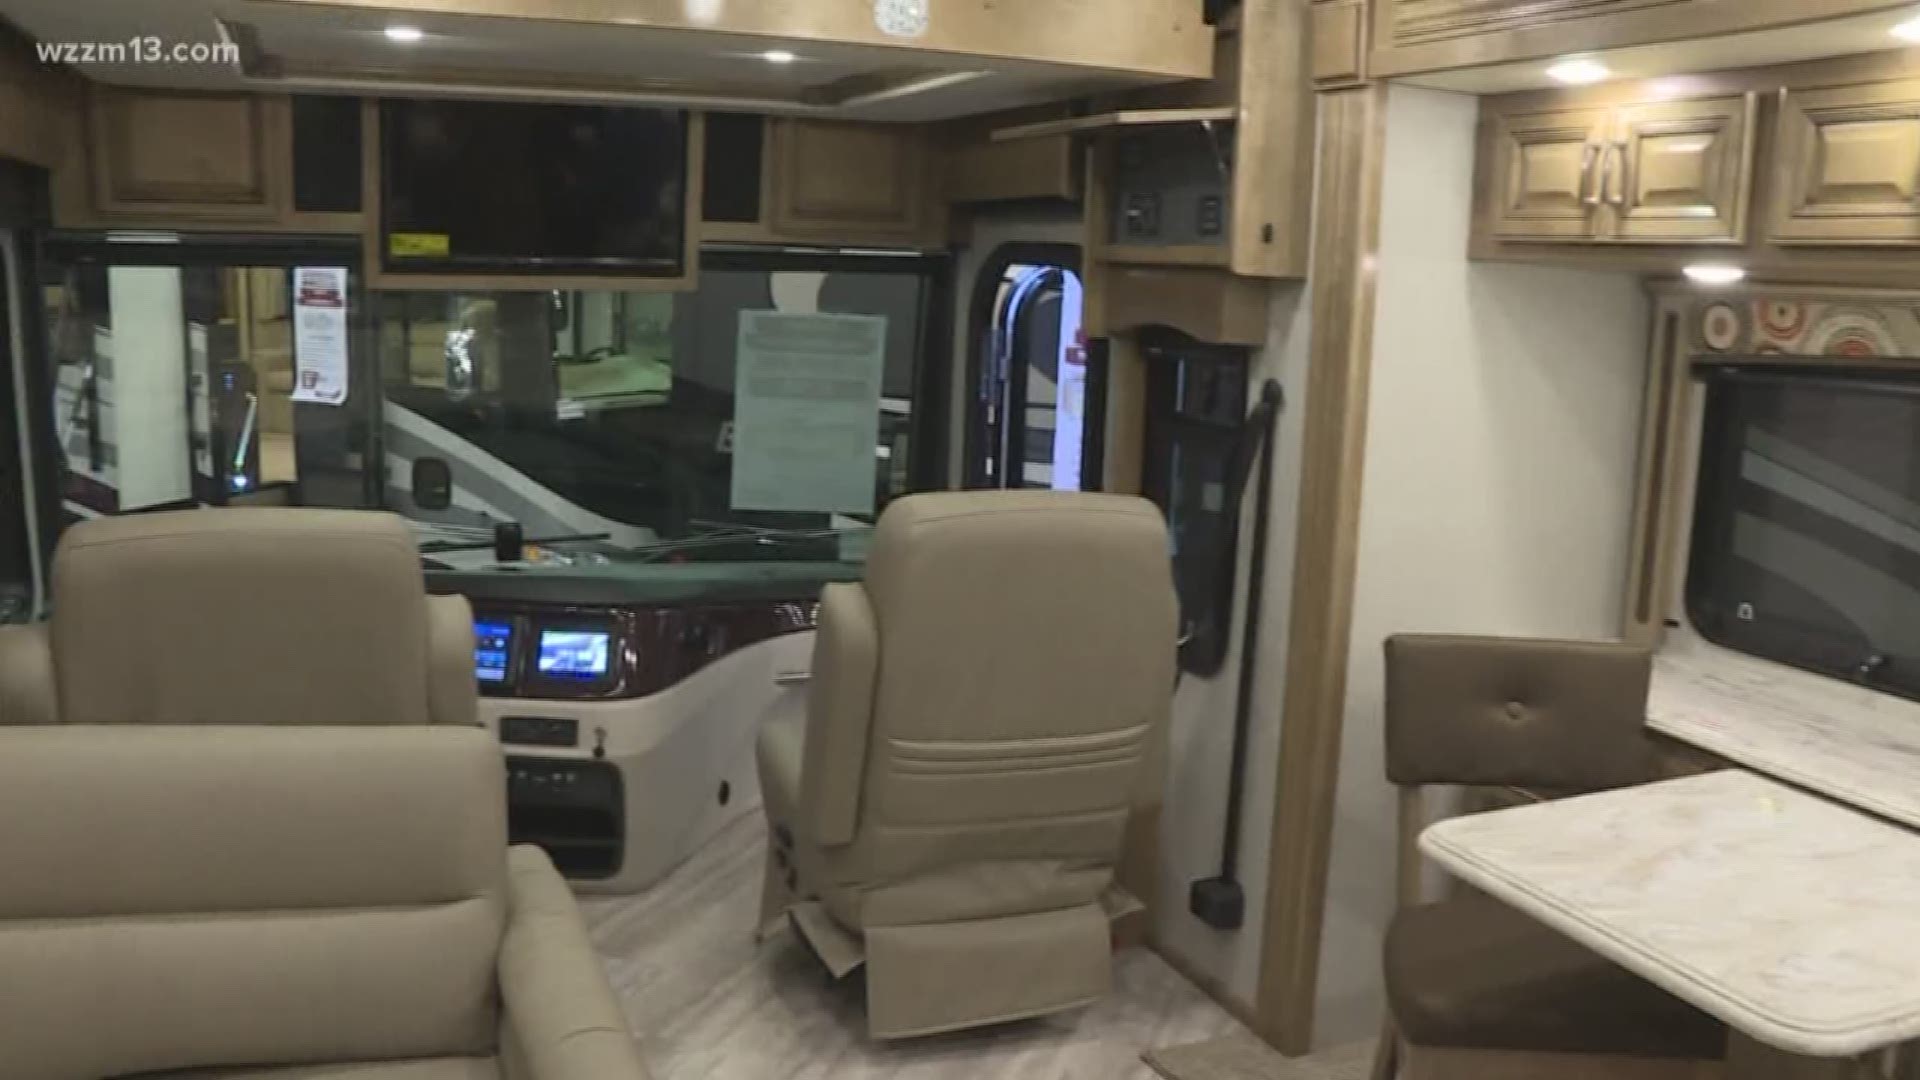 The Grand Rapids Camper, Travel, and RV show is at DeVos Place through Sunday